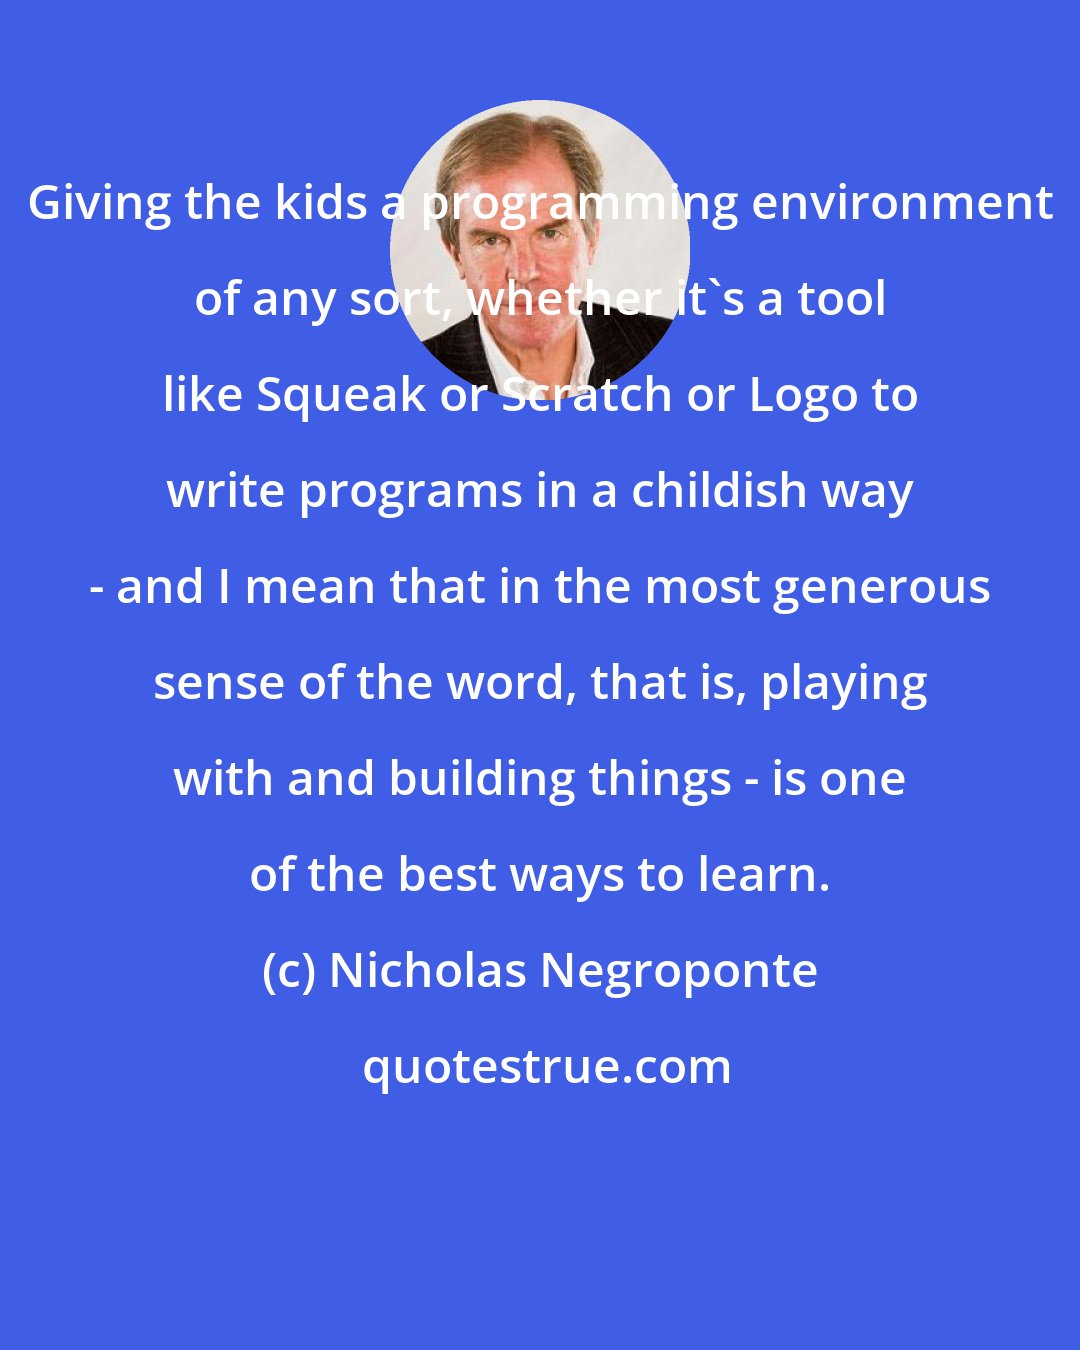 Nicholas Negroponte: Giving the kids a programming environment of any sort, whether it's a tool like Squeak or Scratch or Logo to write programs in a childish way - and I mean that in the most generous sense of the word, that is, playing with and building things - is one of the best ways to learn.